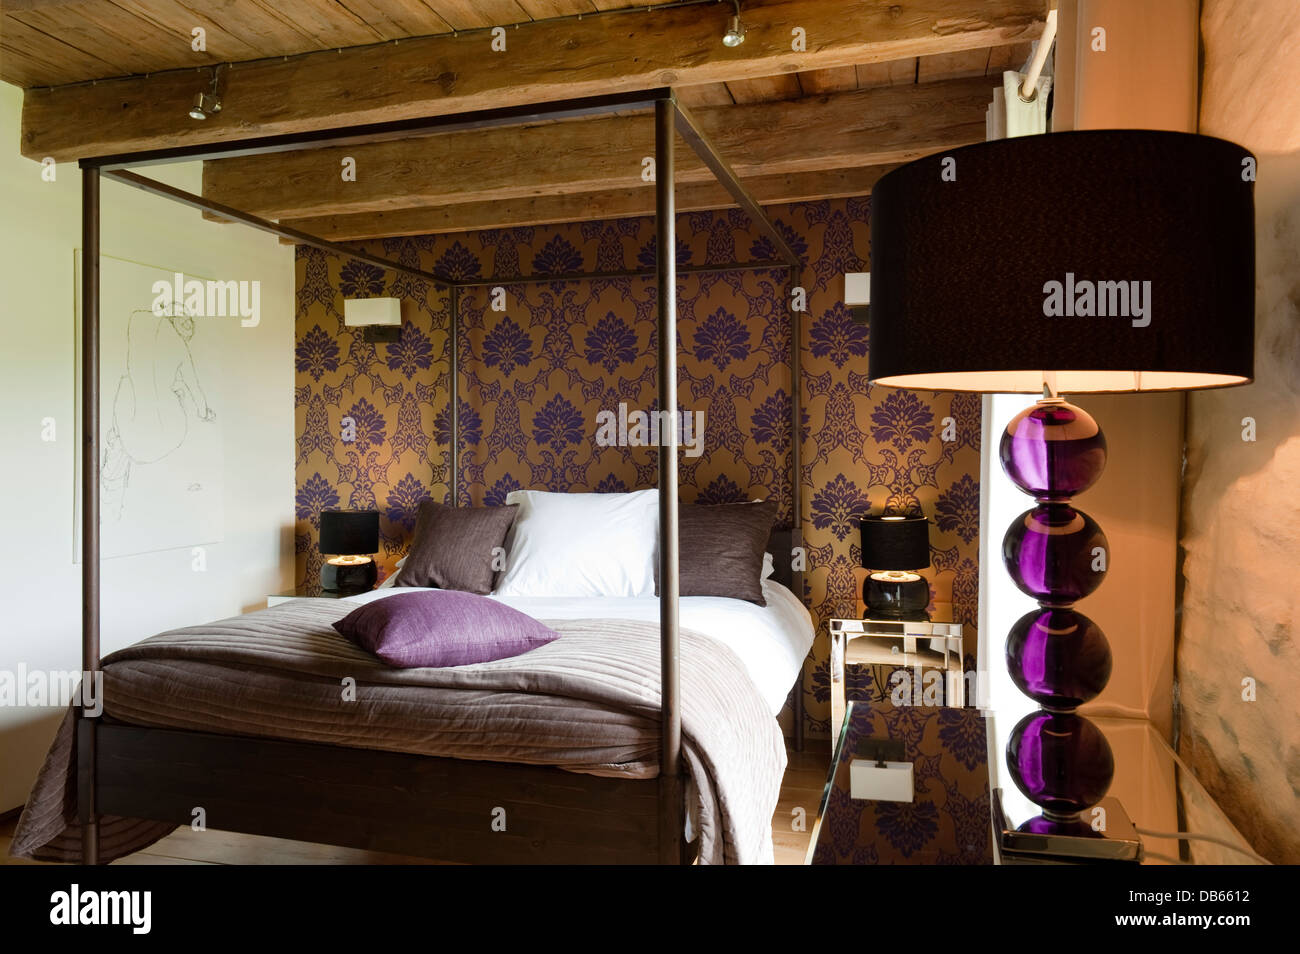 Dramatic 'Rostallan' wallpaper design on a copper coloured metallic  background with four poster bed from Ikea Stock Photo - Alamy